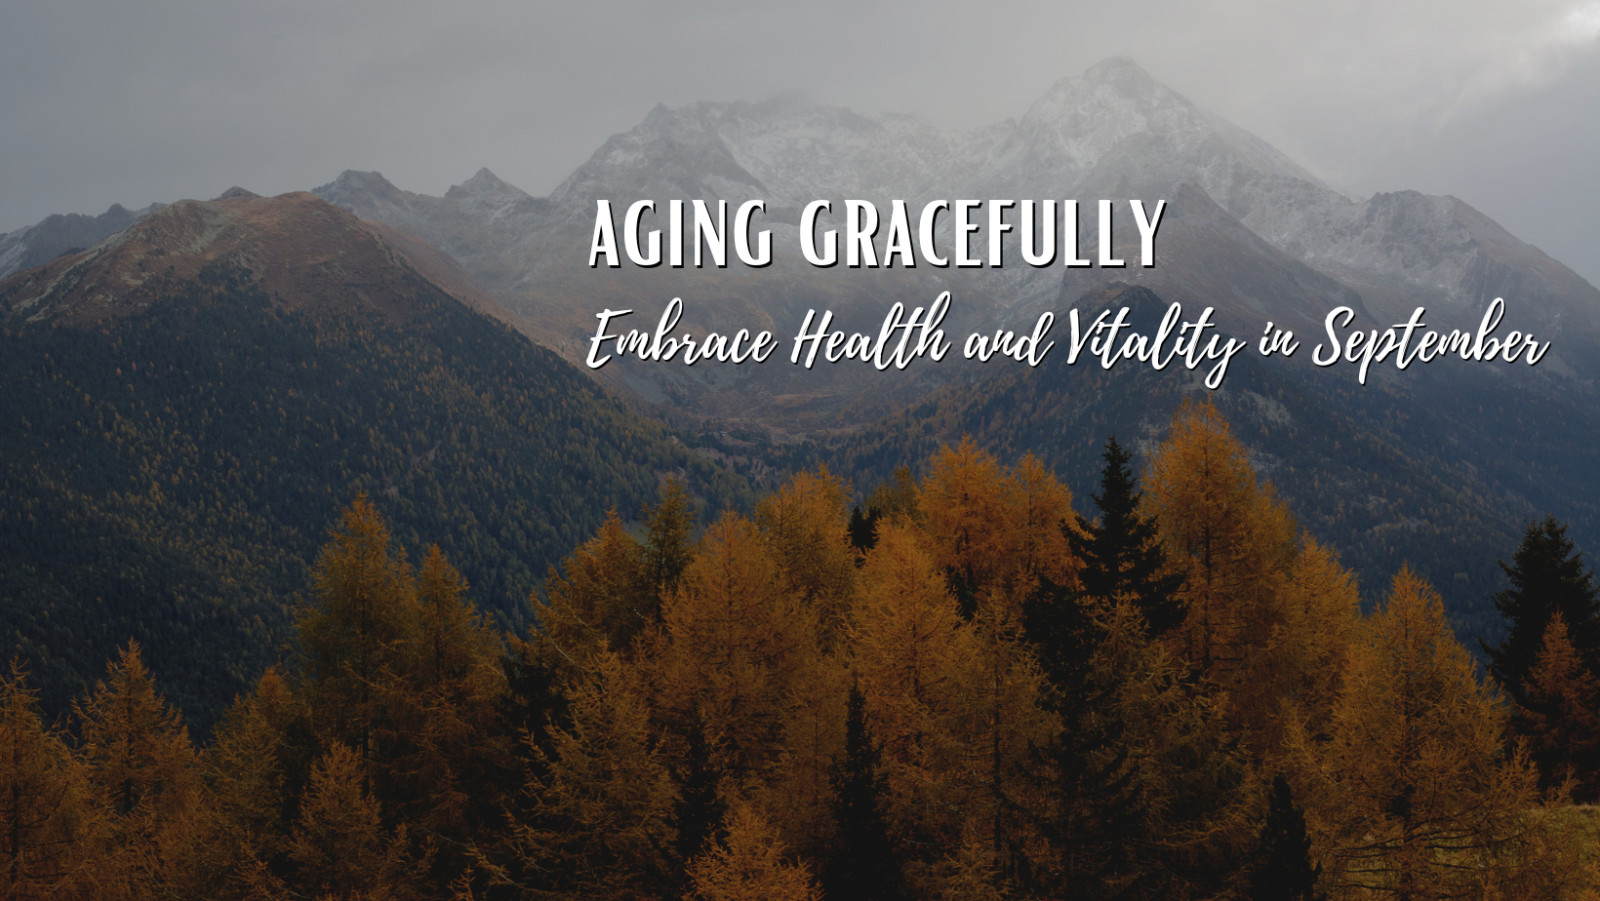 Aging Gracefully: Embrace Health and Vitality in September